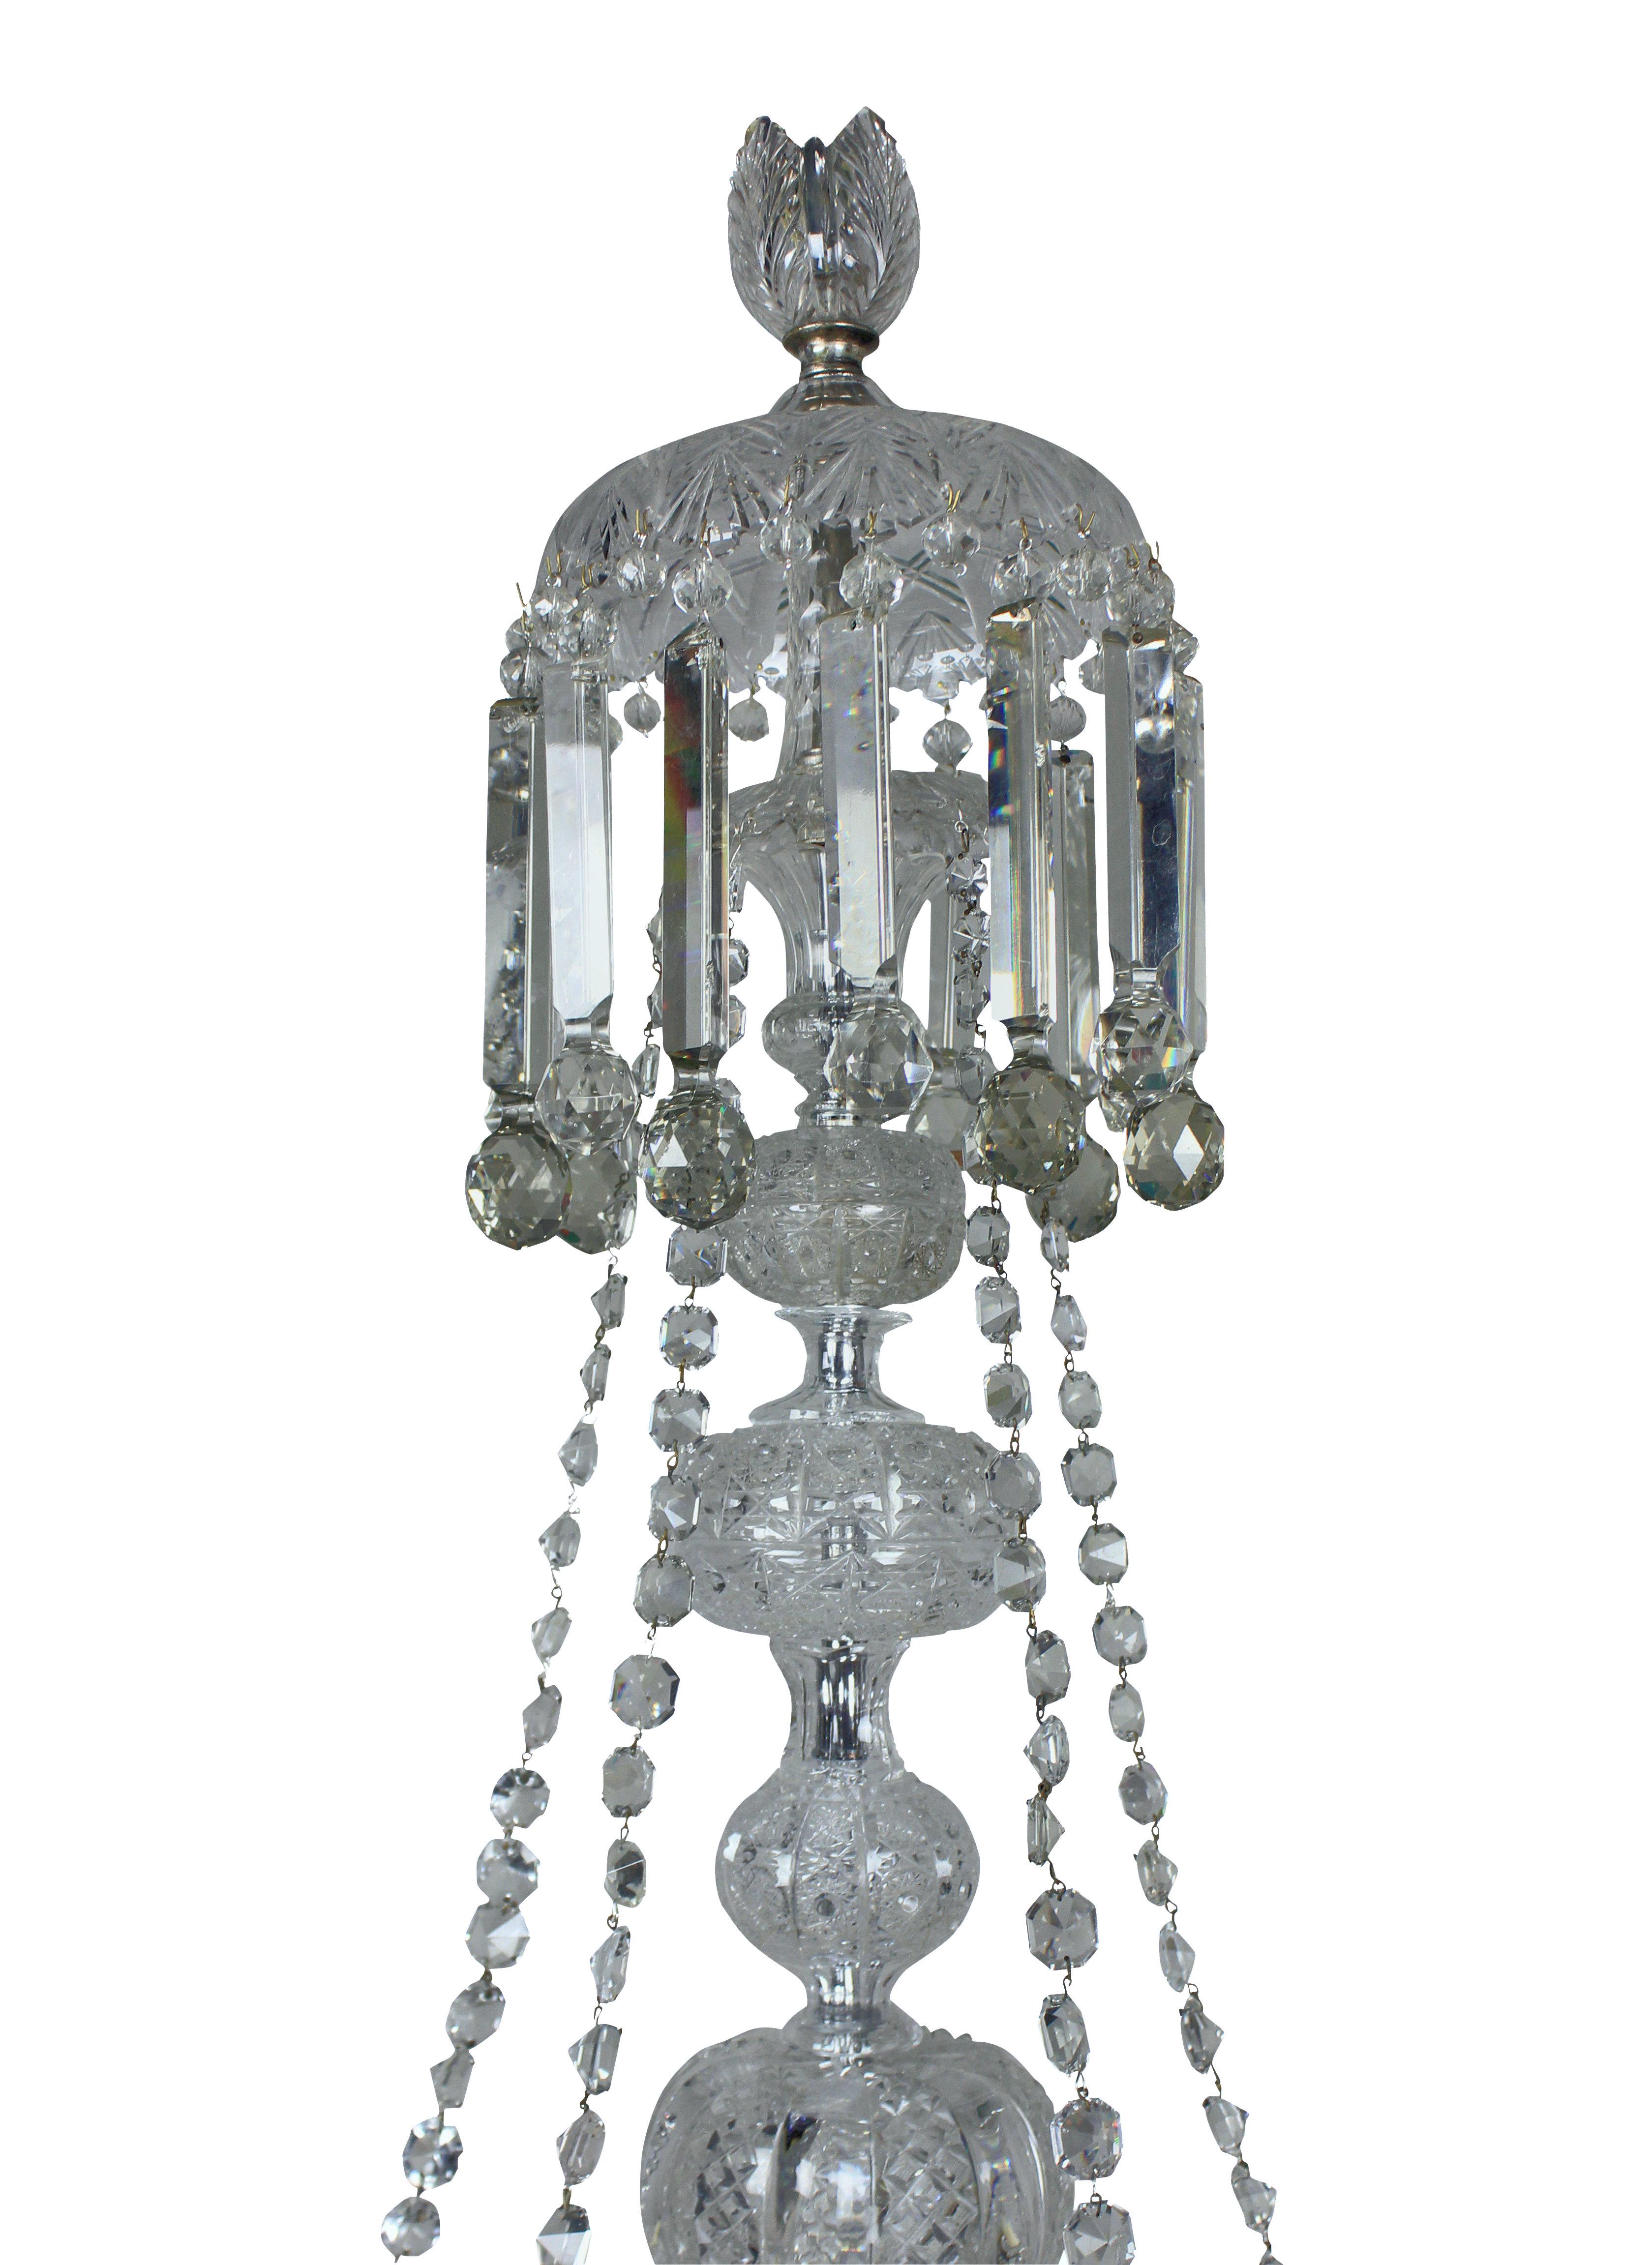 A large English ten light Victorian cut glass chandelier of fine quality. Formerly a gasolier, with hollow glass arms arranged in two tiers and hung throughout with profusely hand cut prisms and swags.